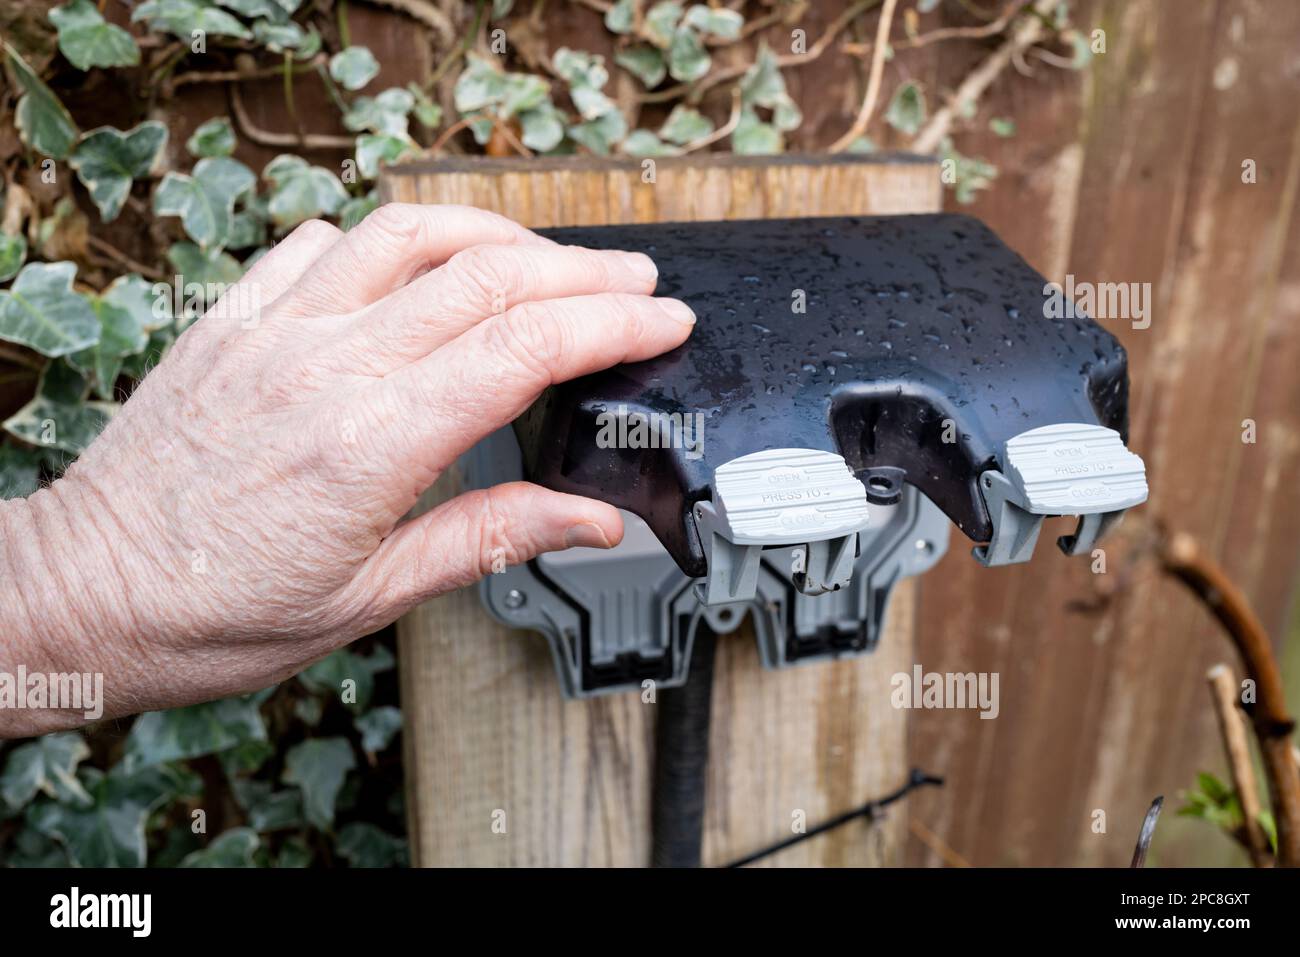 Homeowner about to open the weatherproof cover of a double gang external electrical sockets. Seen in a garden after a heavy downpour Stock Photo